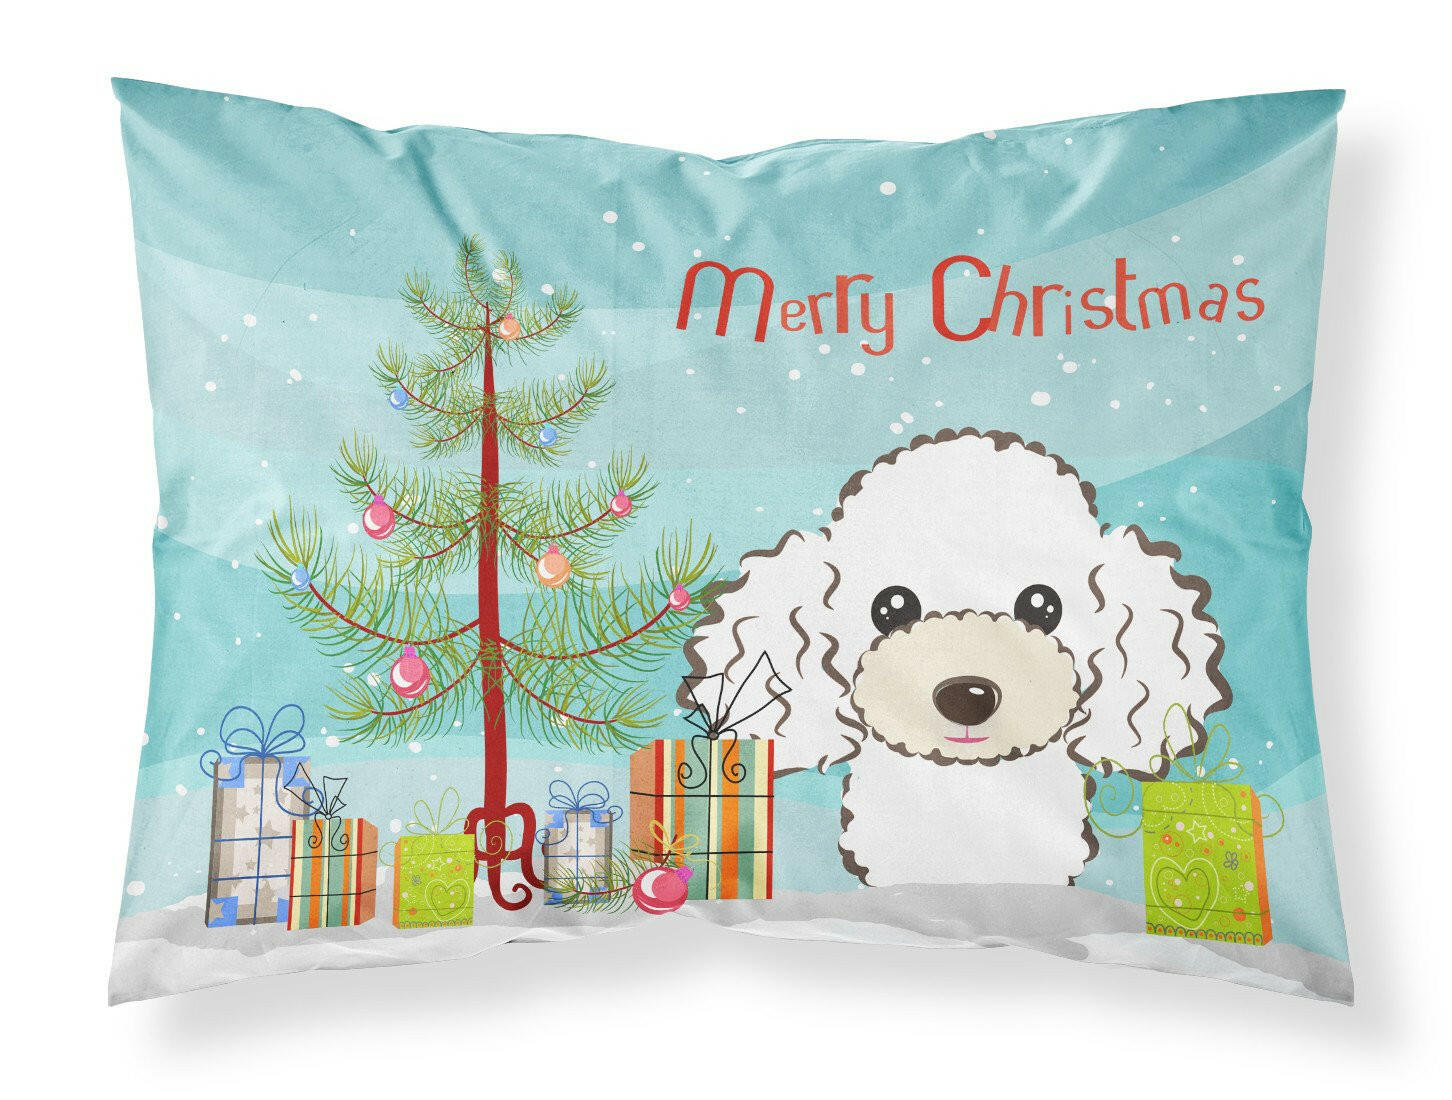 Christmas Tree and White Poodle Fabric Standard Pillowcase BB1629PILLOWCASE by Caroline's Treasures